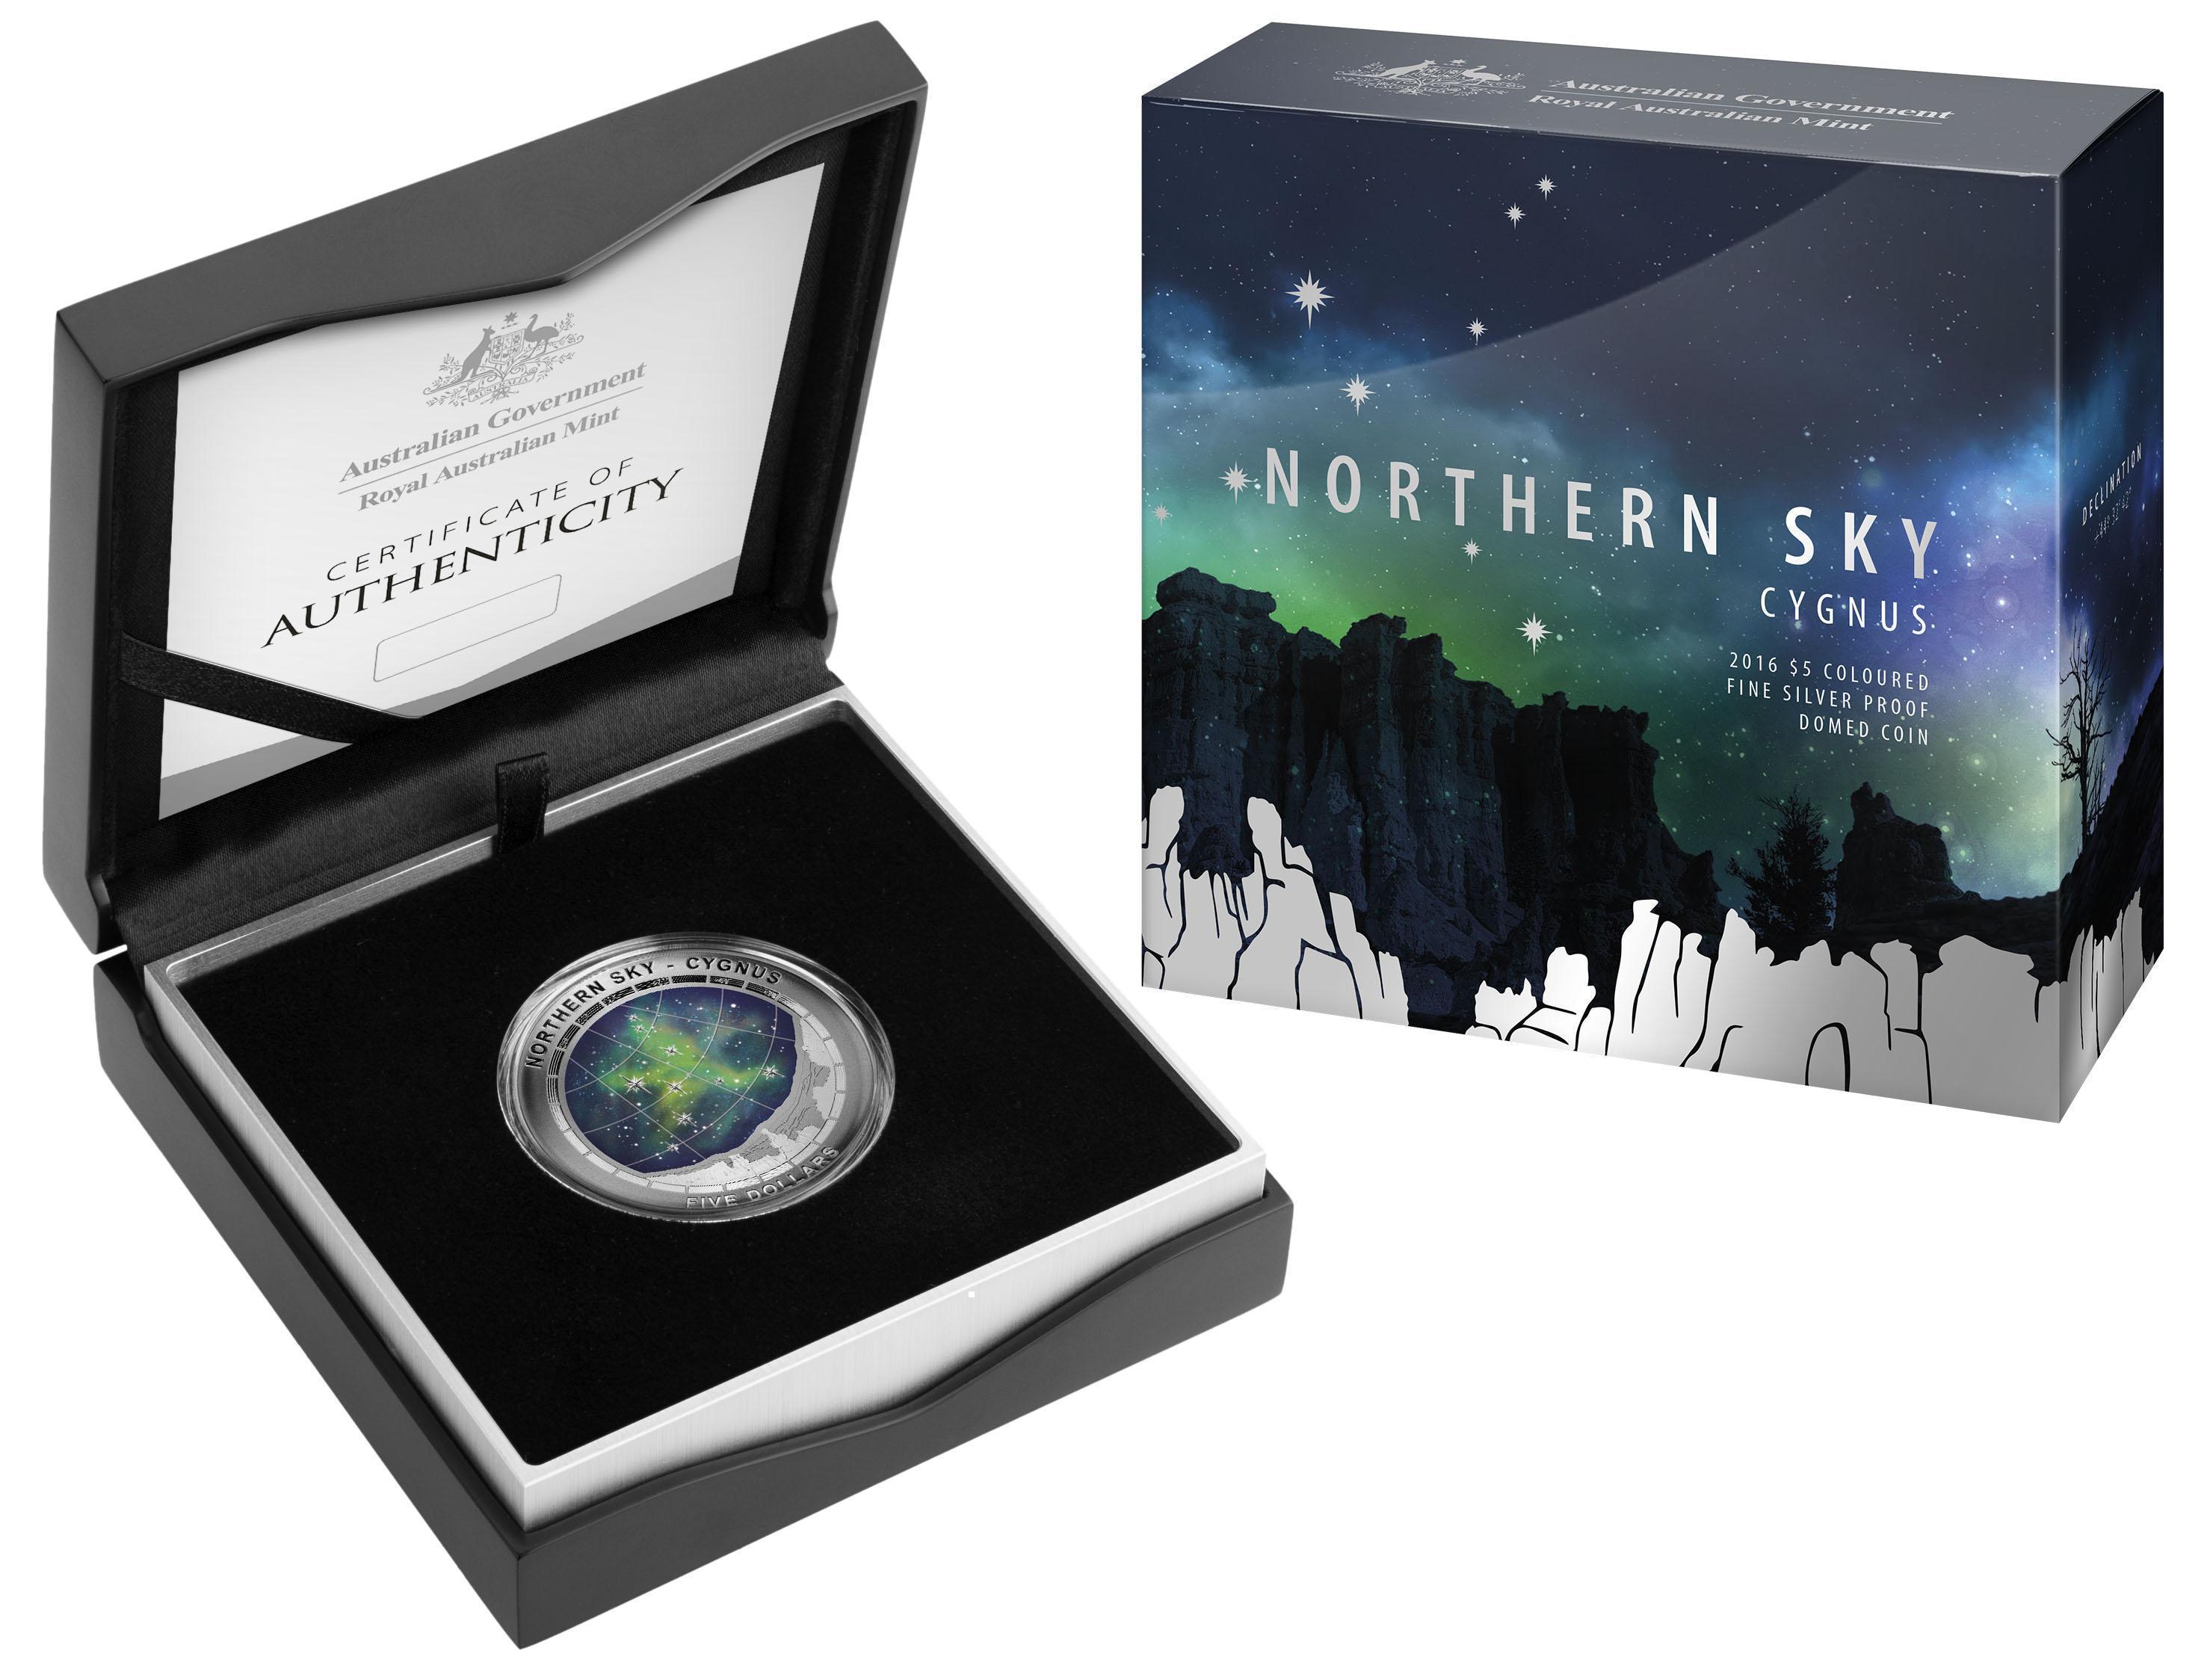 2016 $5 Northern Skies CYGNUS Colour Printed Silver Proof Domed Coin Royal Australian Mint RAM